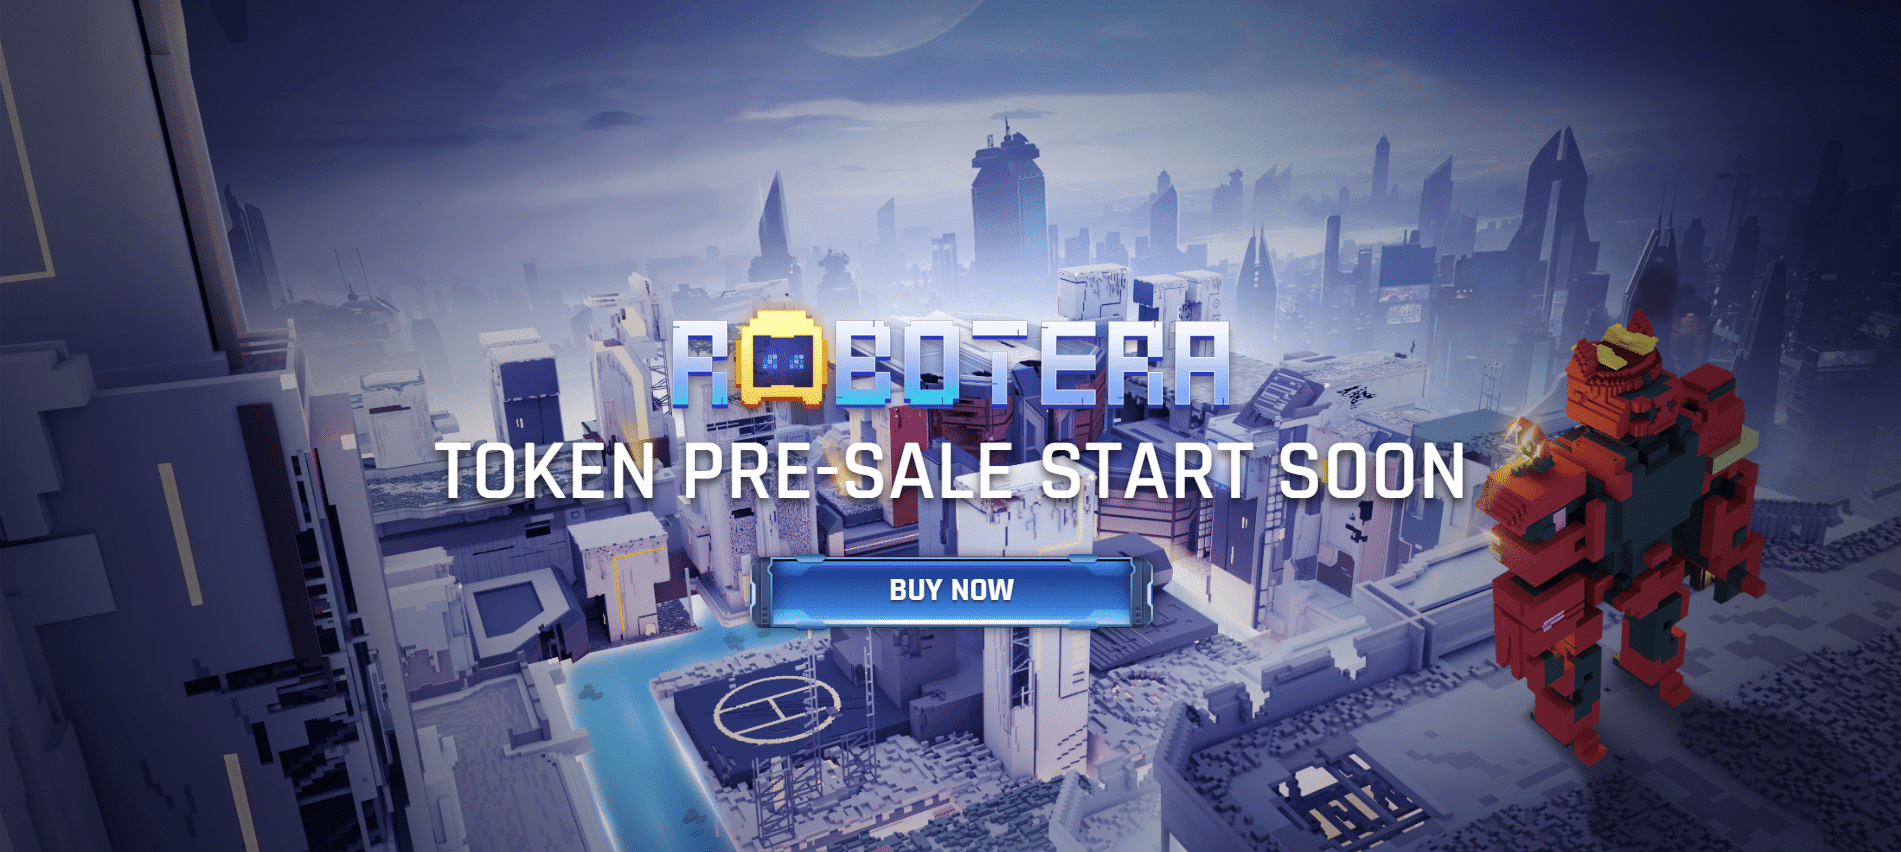 RobotEra — Novel play-to-earn game with robots, land ownership, and planet building